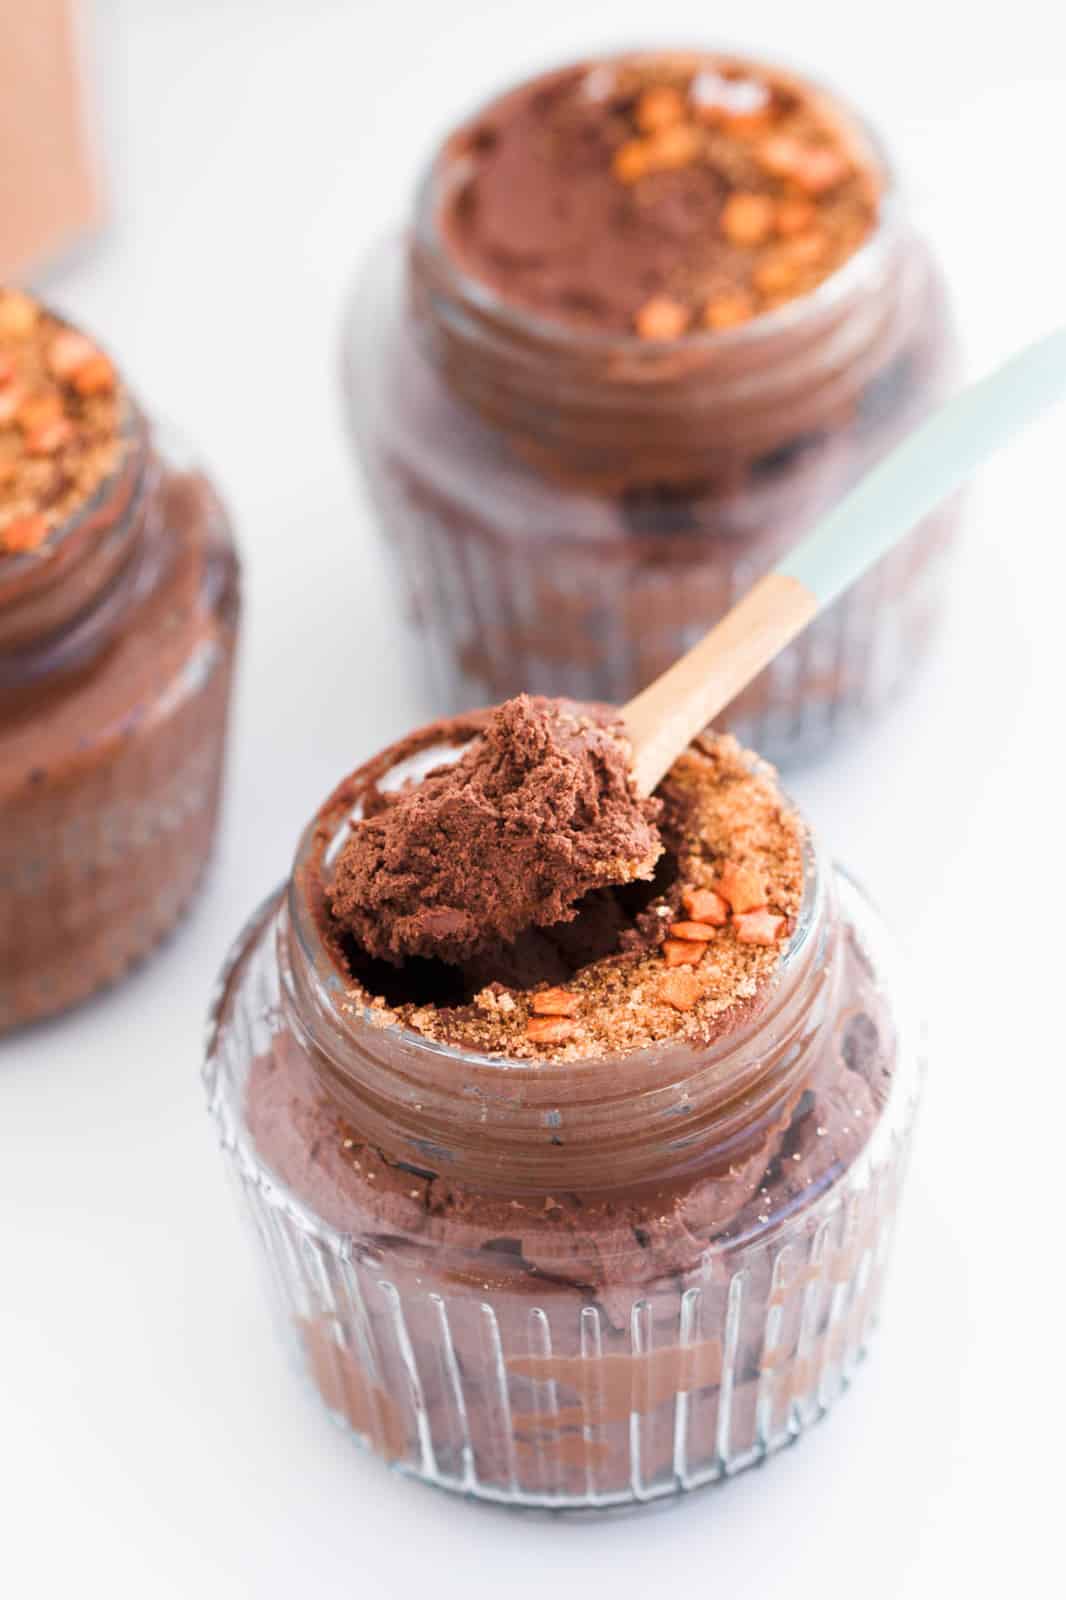 A wooden spoon lifting a chocolate mousse dessert out of a glass jar.